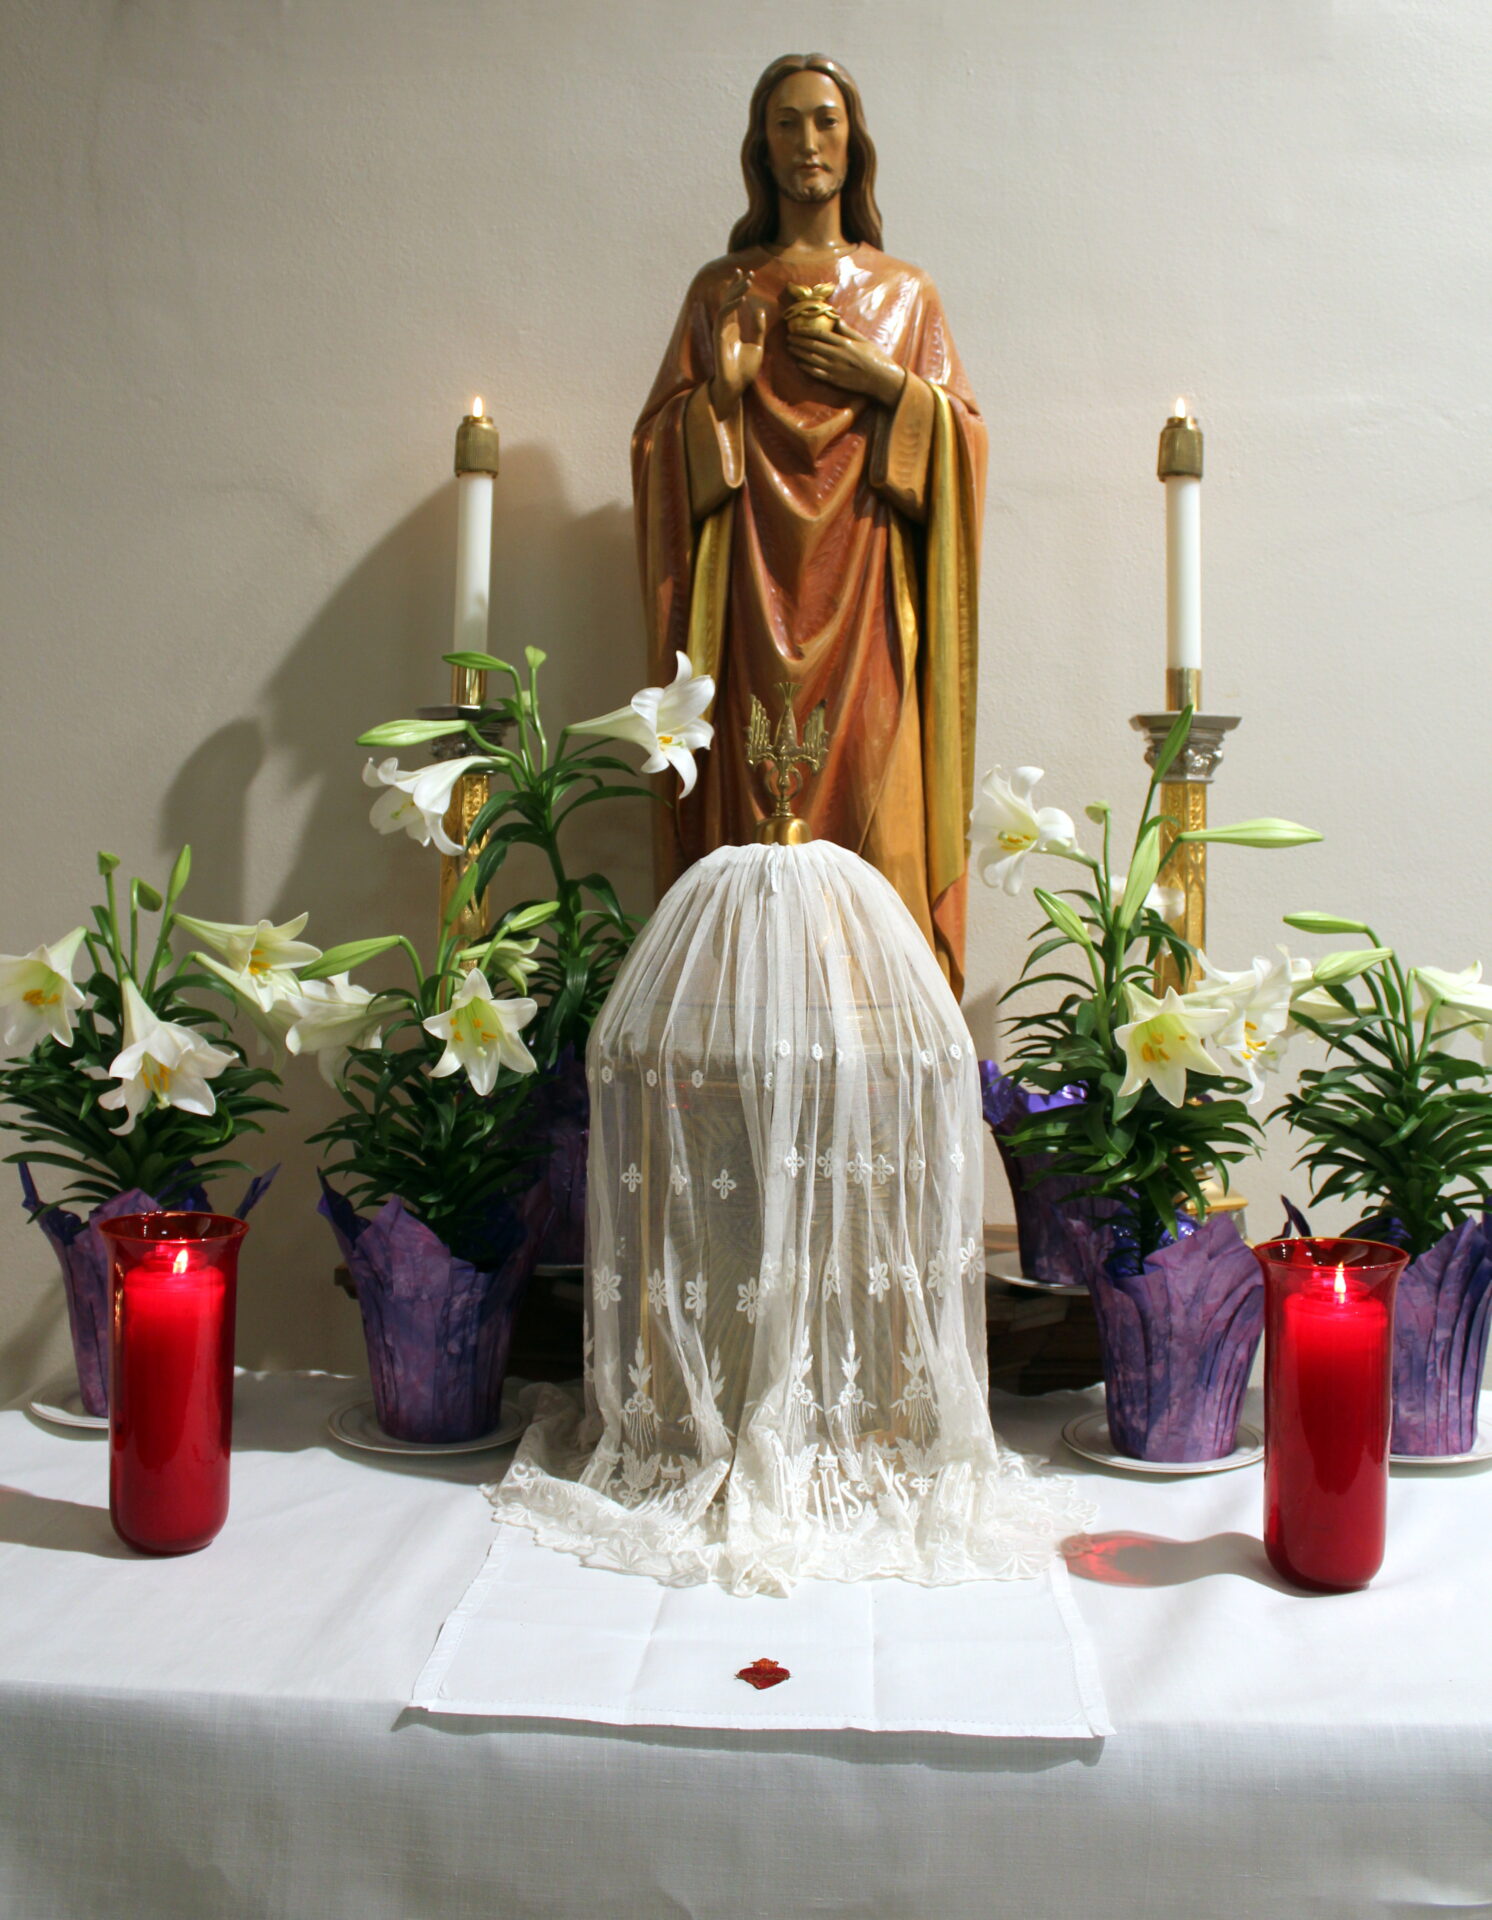 An altar with two red candles and purple flower vases